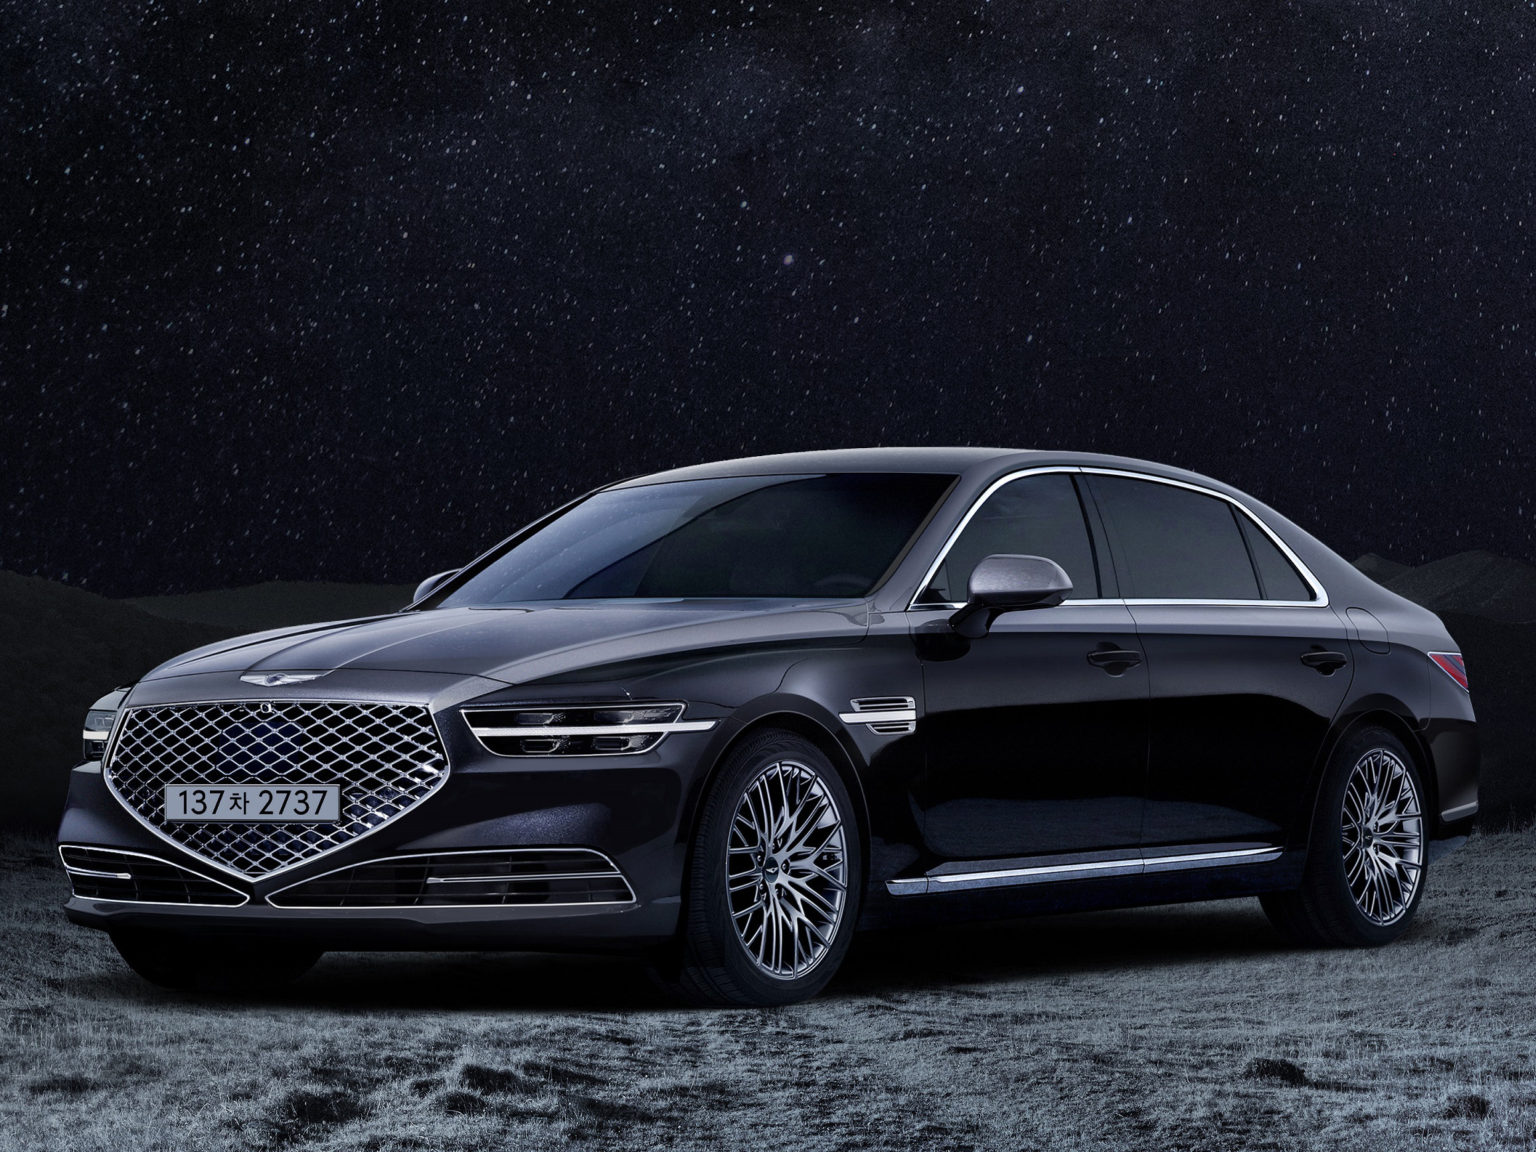 2021 Genesis G90 Stardust special edition won't be sold in the U.S ...